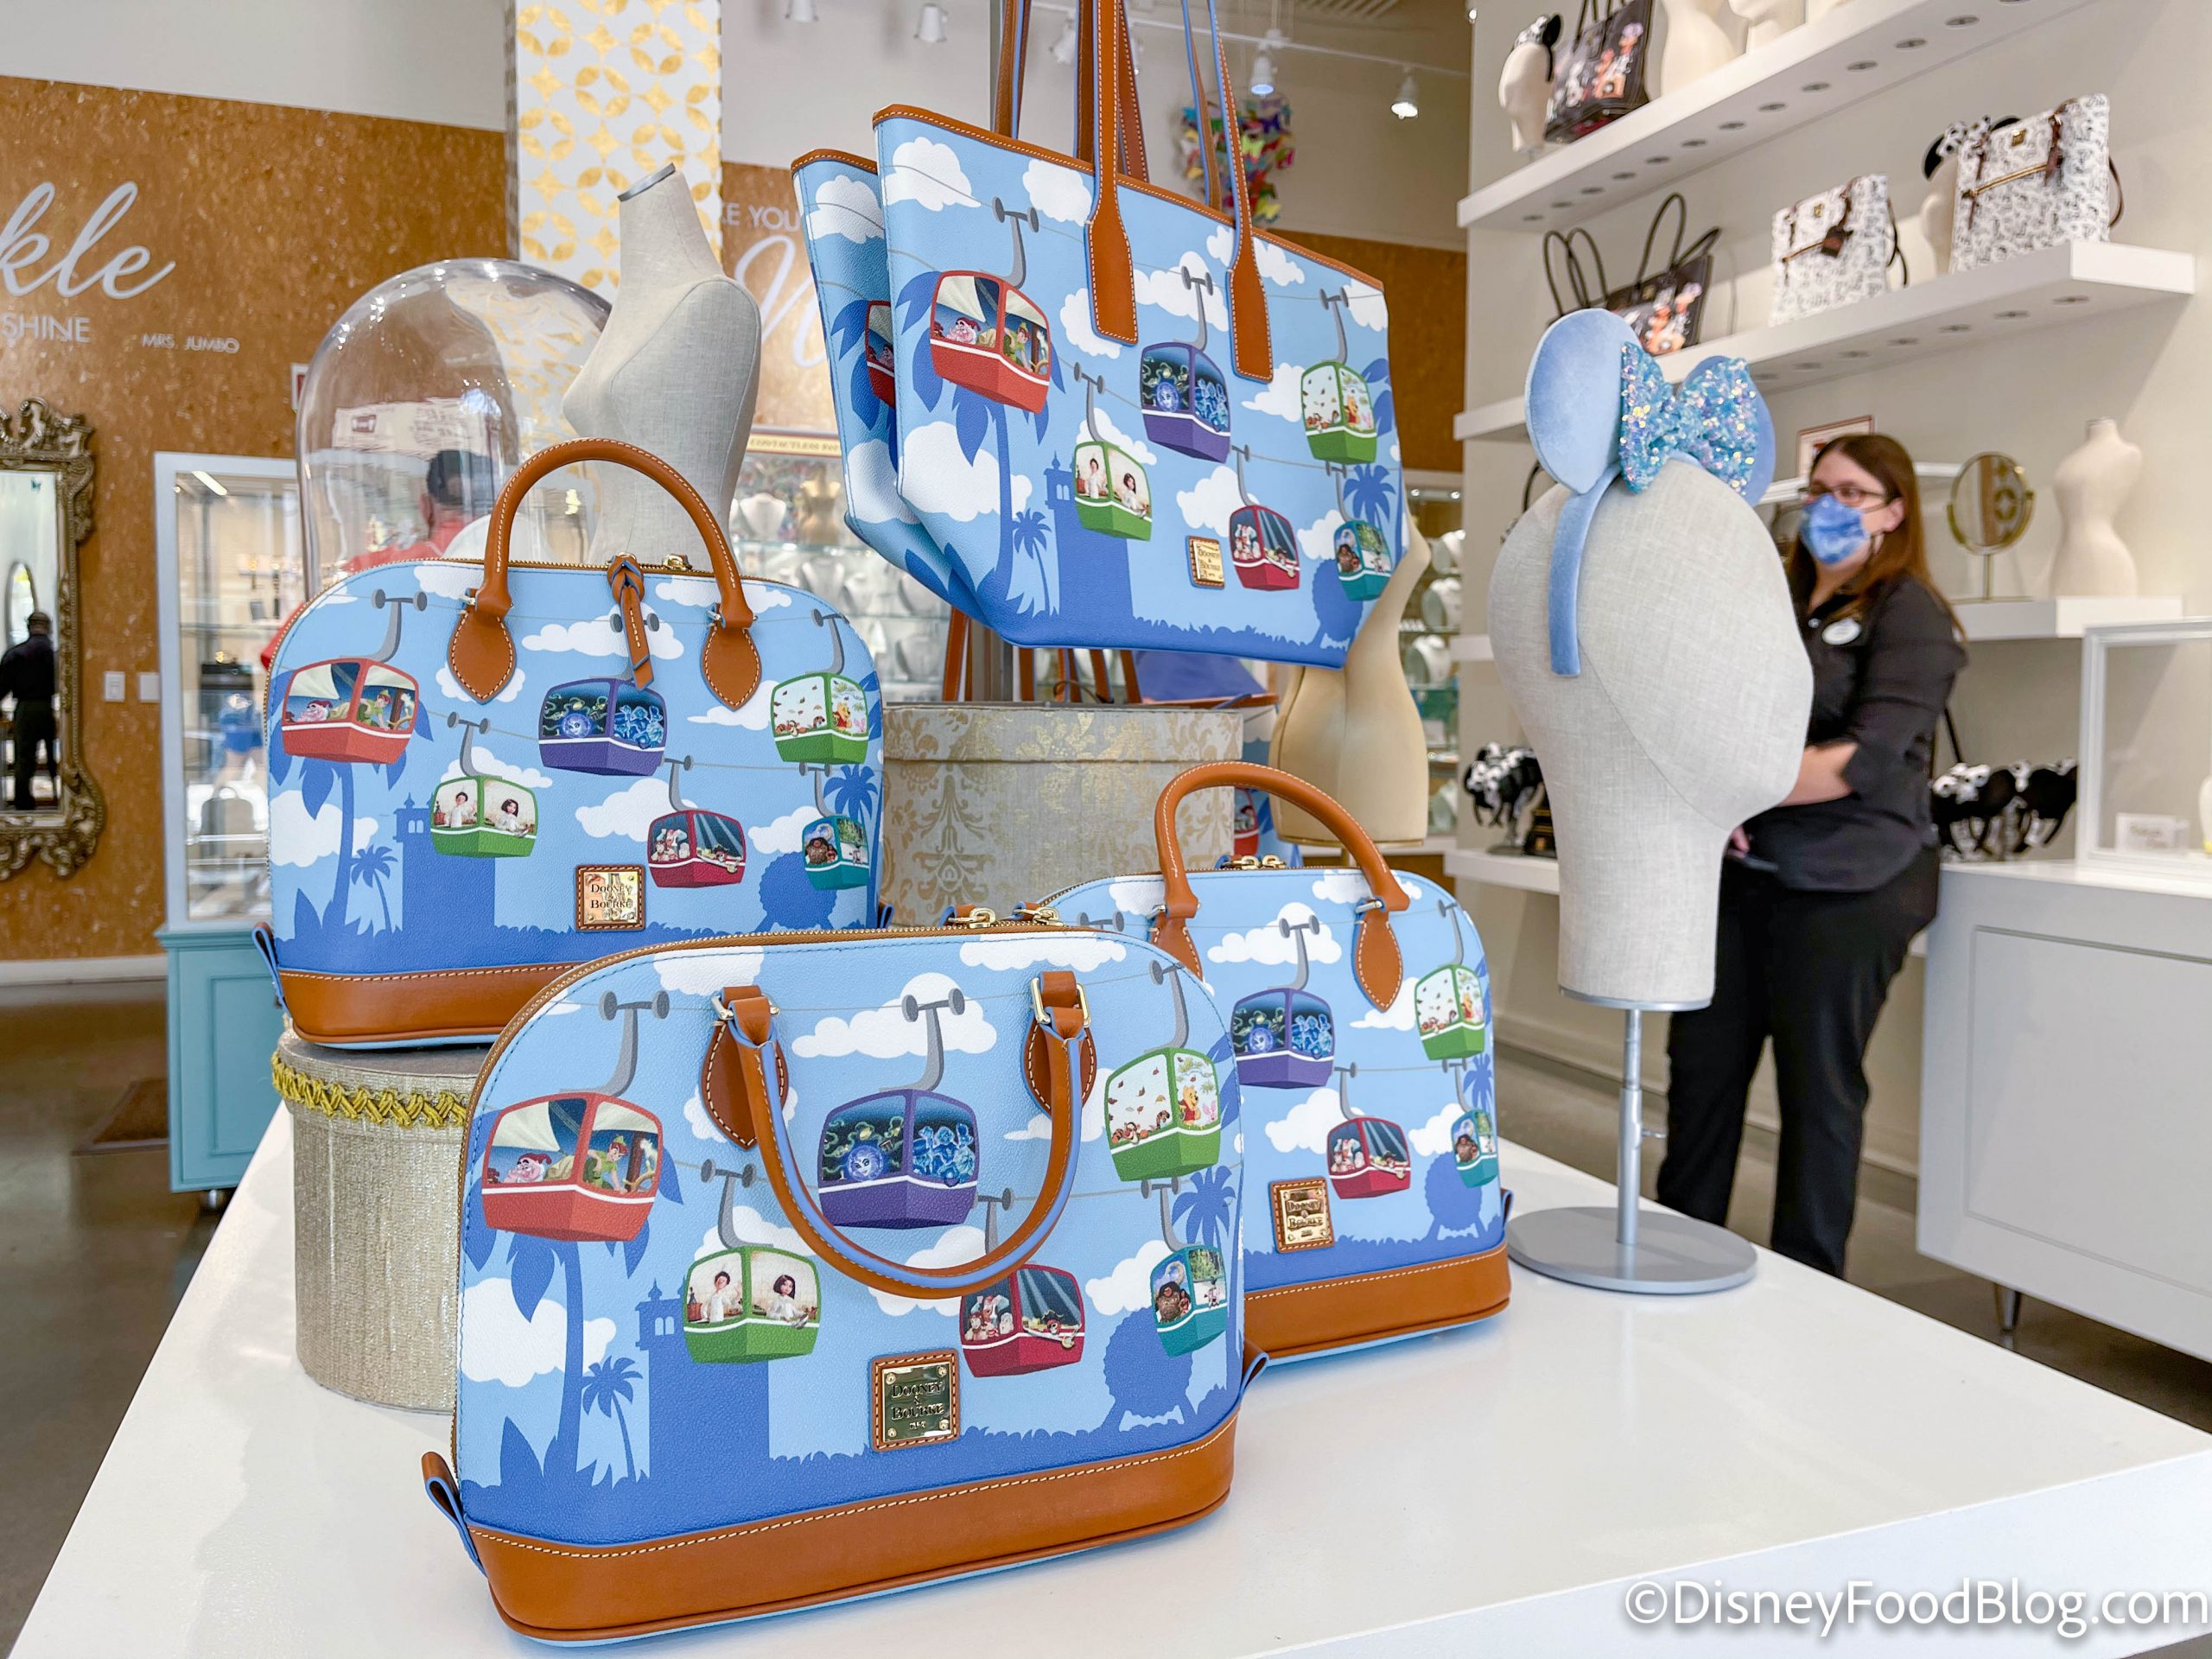 https://www.disneyfoodblog.com/wp-content/uploads/2021/02/wdw-2021-disney-springs-ever-after-jewelry-co-skyliner-dooney-and-bourke-bags-purses-scaled.jpg